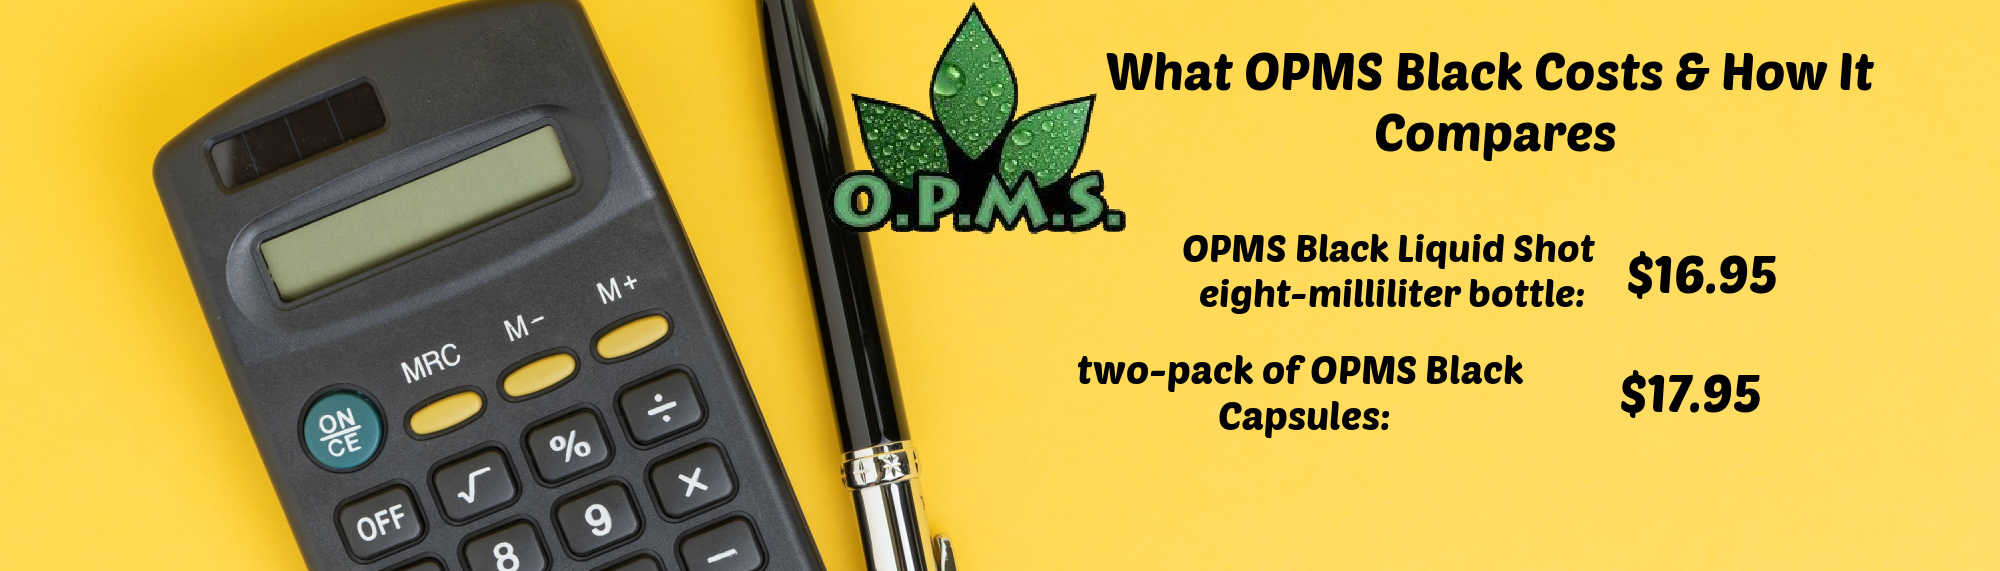 image of what opms black costs and how it compares